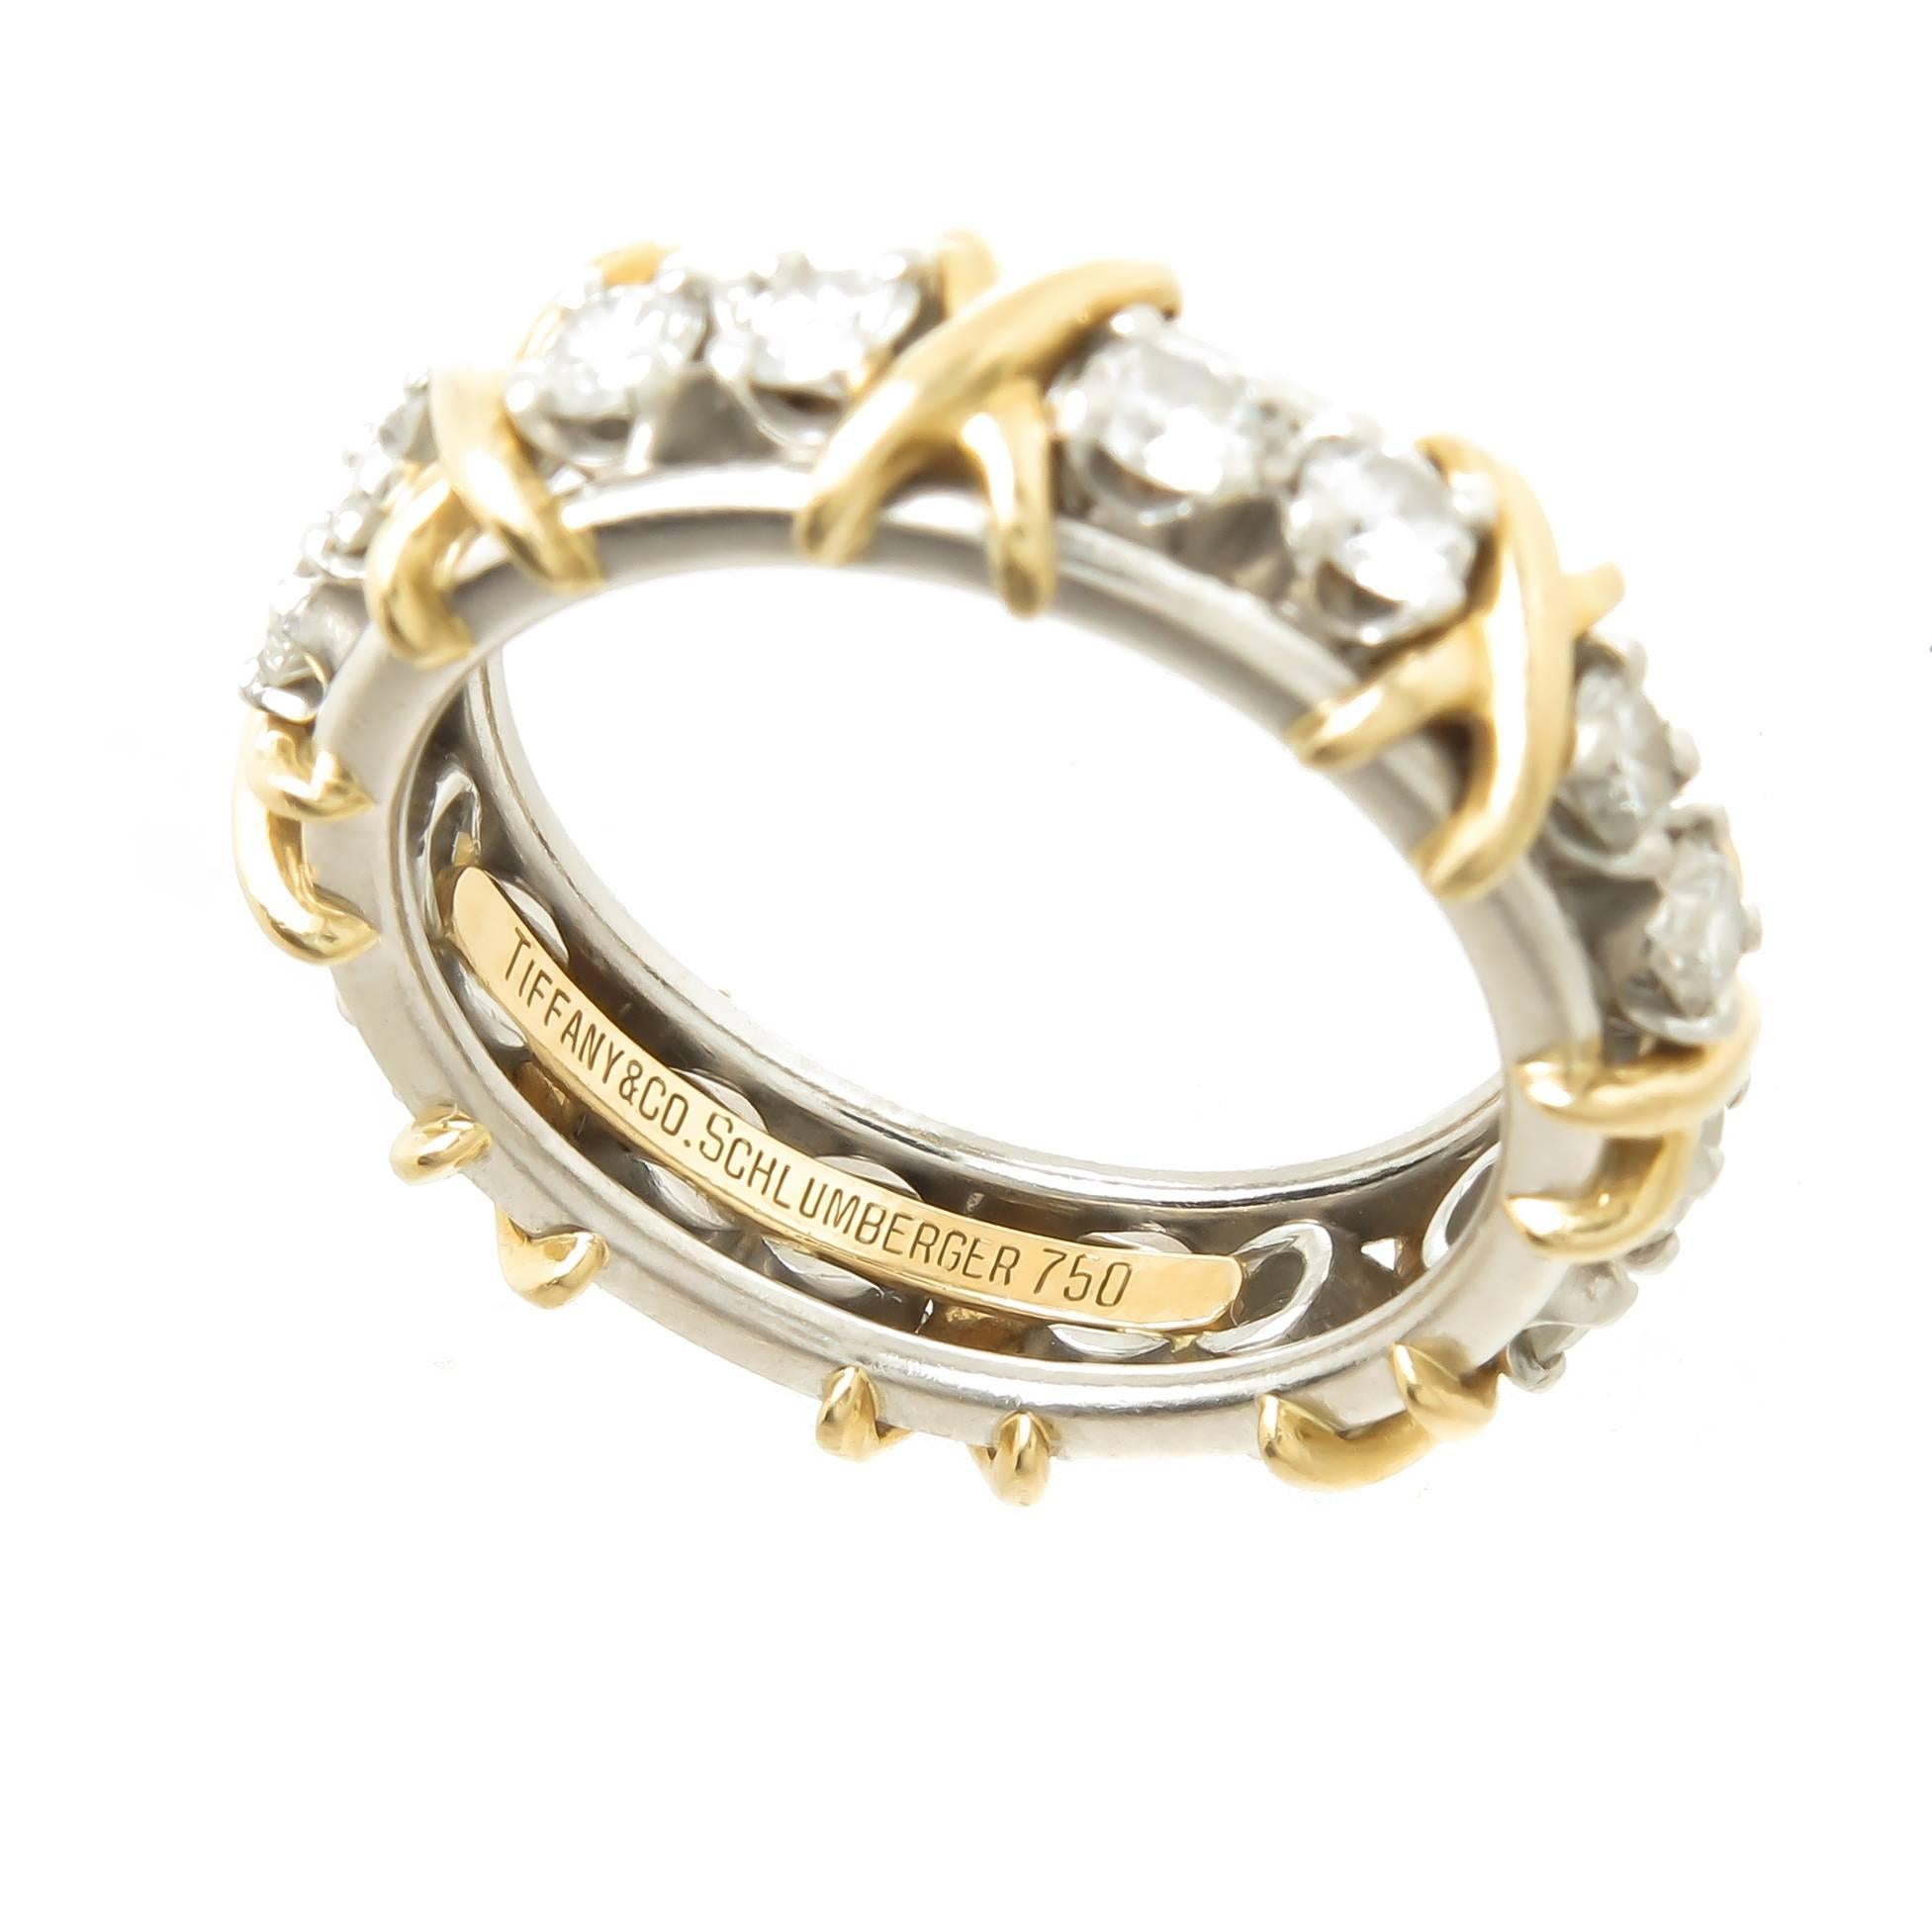 Jean Schlumberger for Tiffany & Company, Platinum and 18k Yellow Gold X Band Ring. Set with 18 Round Brilliant cut Diamonds totaling 1.32 Carats and grading as G in color and VS in Clarity. measures 5 MM wide and is a finger size 6 1/2